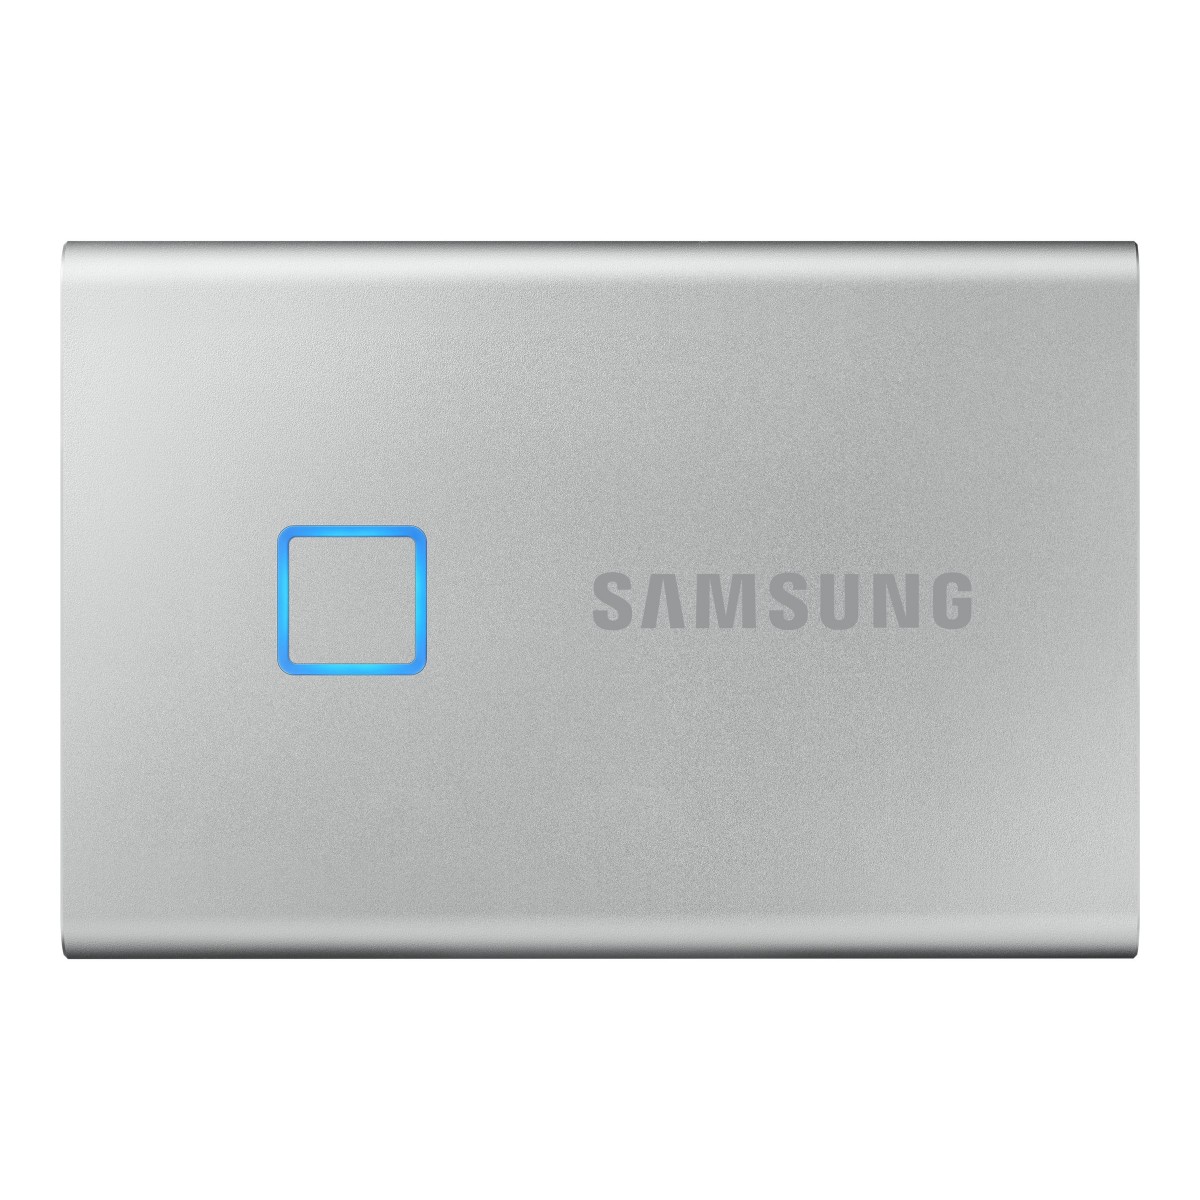 Samsung Portable SSD T7 Touch 1TB - Silver - 1000 GB - USB Type-C - 3.2 Gen 2 (3.1 Gen 2) - 1050 MB/s - Password protection - Si